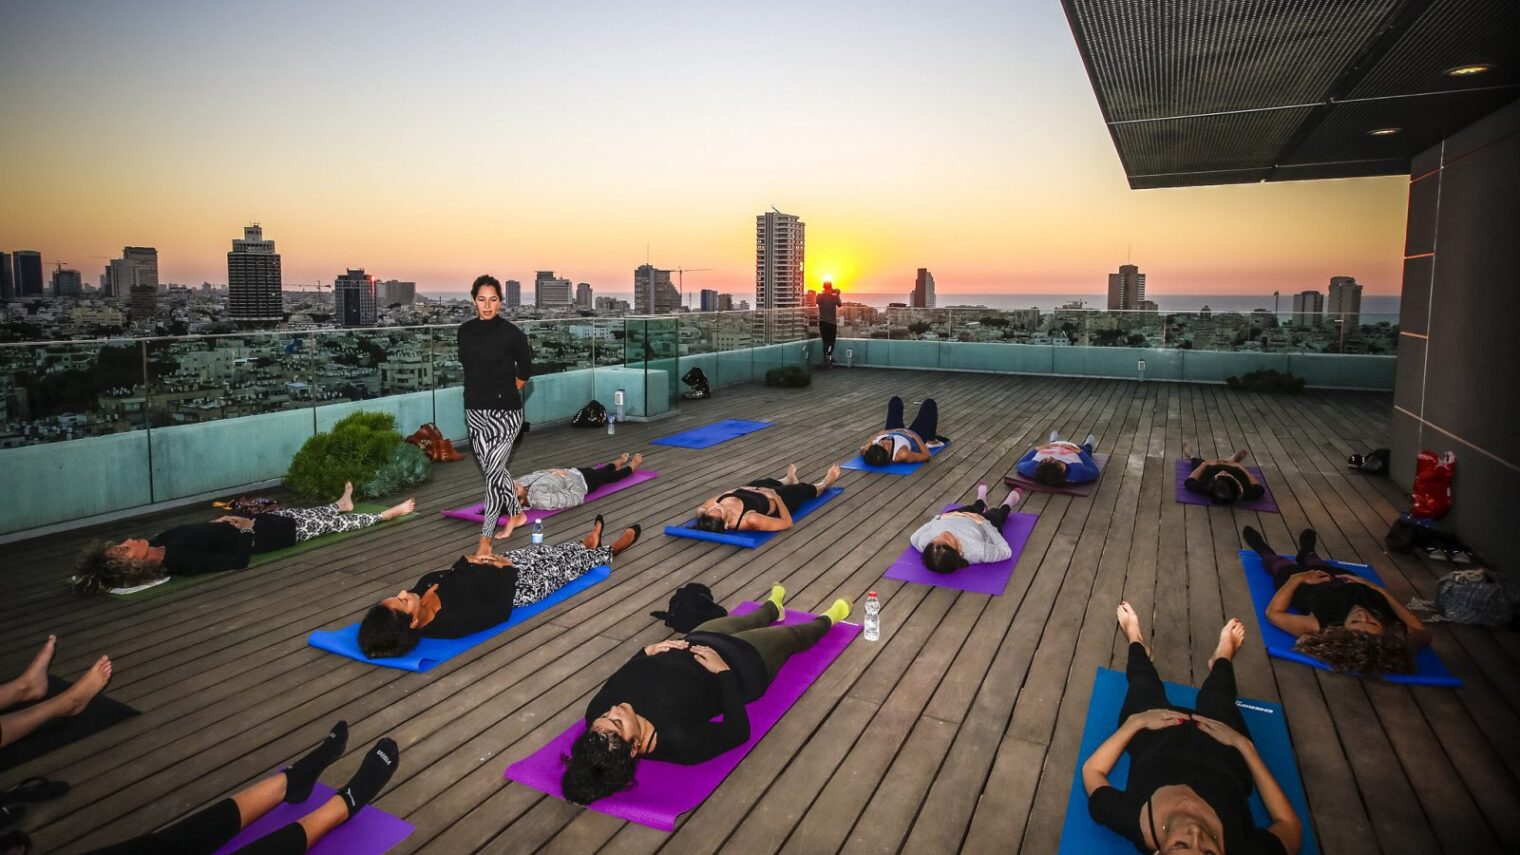 Or even on the rooftop. A yoga class on a rooftop in Tel Aviv. Photo courtesy of Tel Aviv municipality